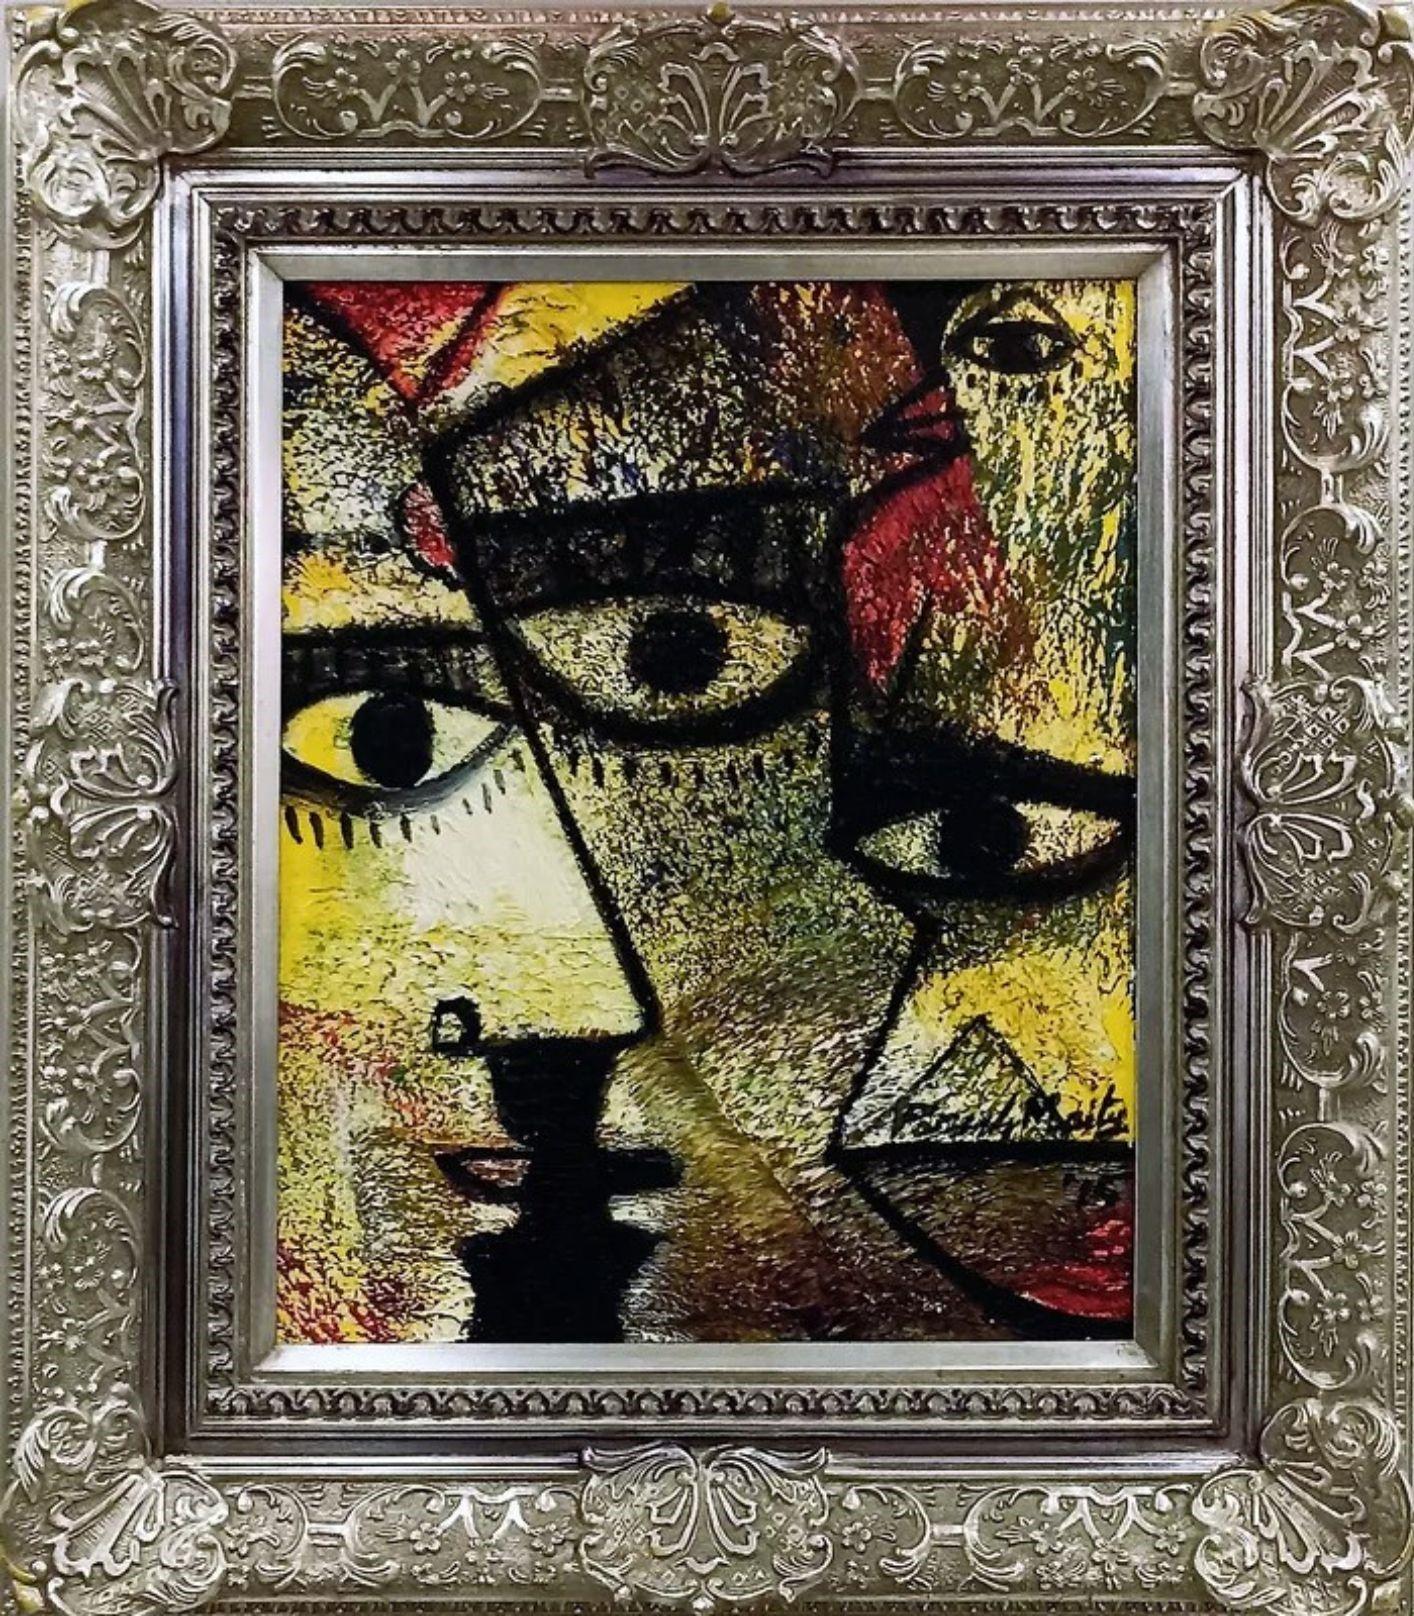 Paresh Maity Figurative Painting - Expression-VII, Oi on Canvas, Black, Yellow, Red,  by Indian Artist"In Stock"